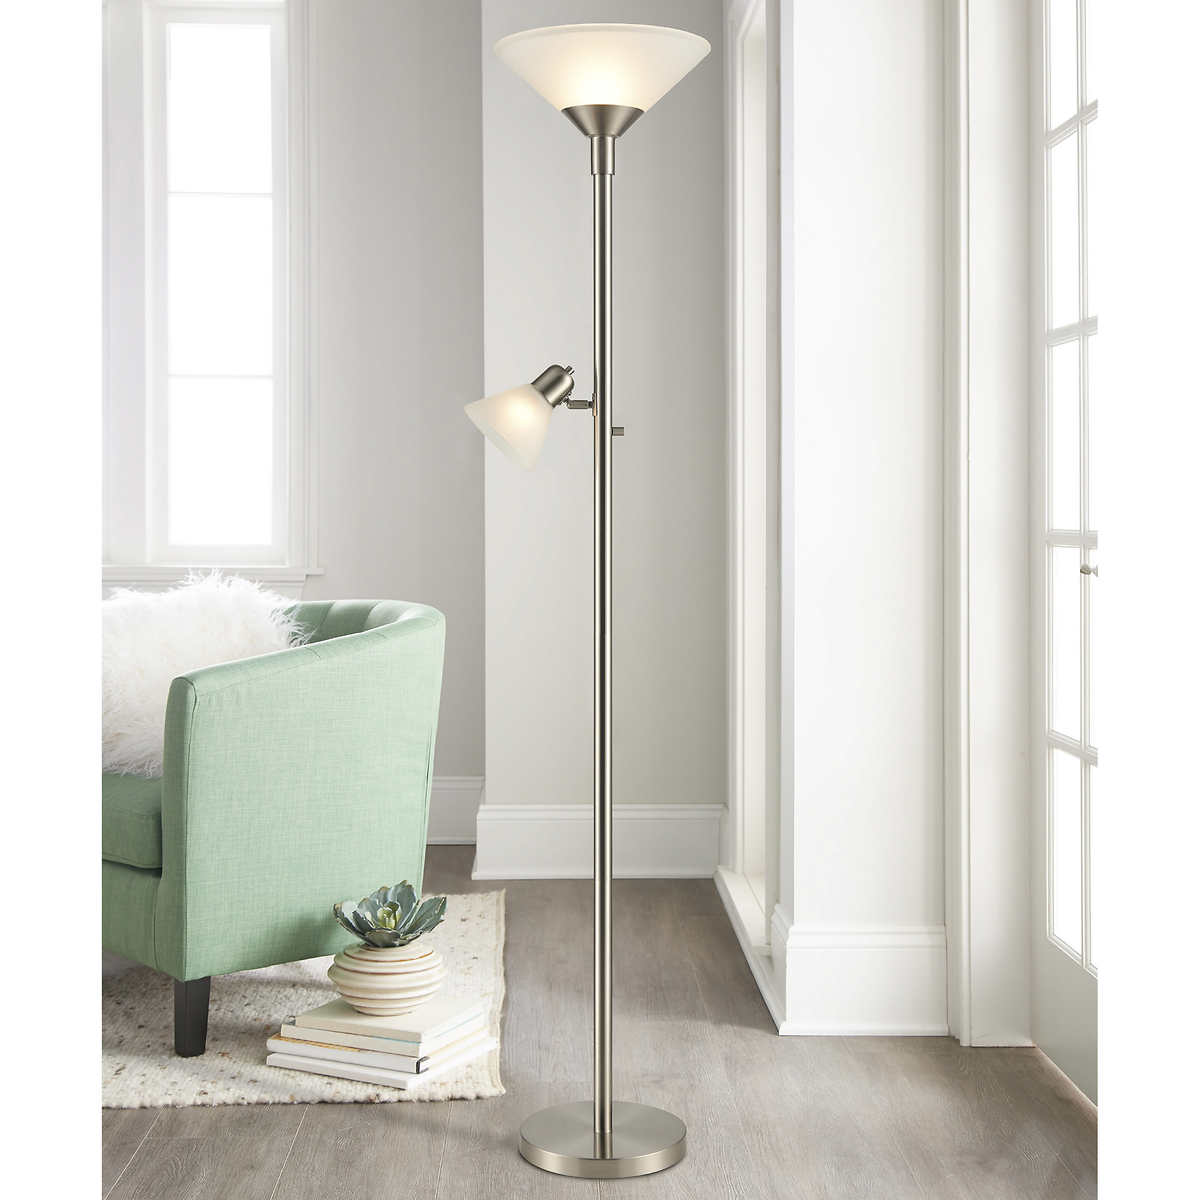 Torchiere Floor Lamp With Reading Light, Led Torchiere Floor Lamp With Reading Light